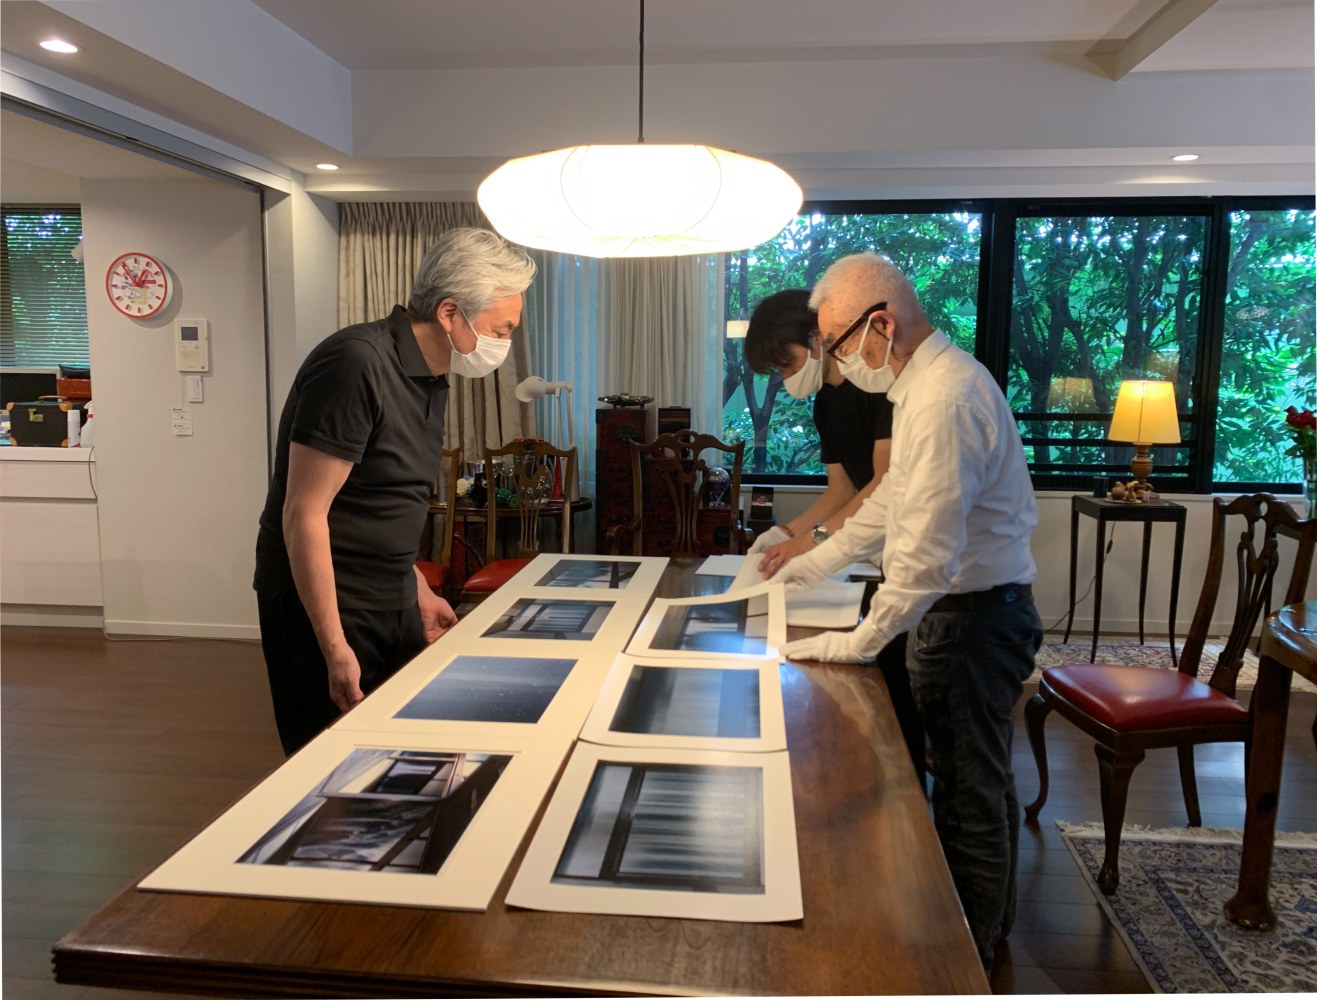 The master photographer, Mr. Bishin Jumongi, is showing me photographs of my works he took at Koyasan.&amp;nbsp;&amp;nbsp;It will be published from a US publisher soon.